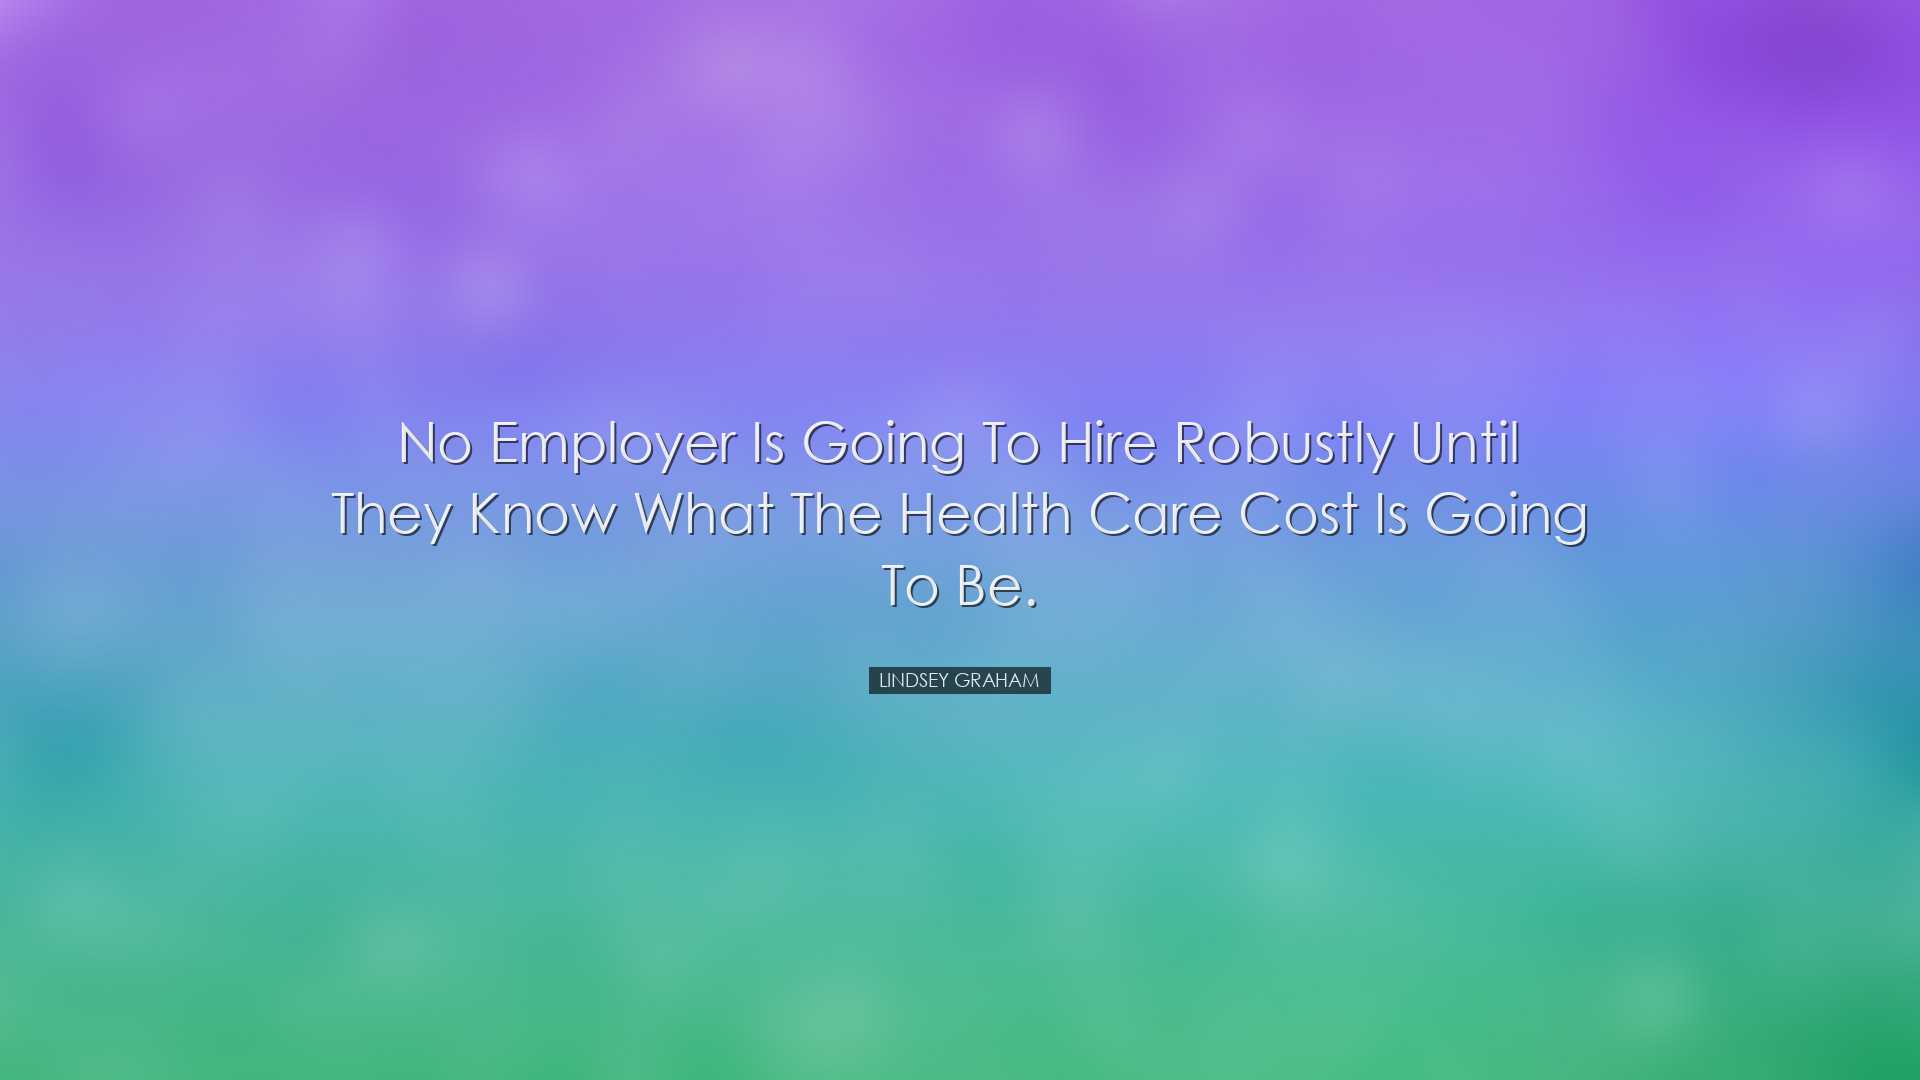 No employer is going to hire robustly until they know what the hea